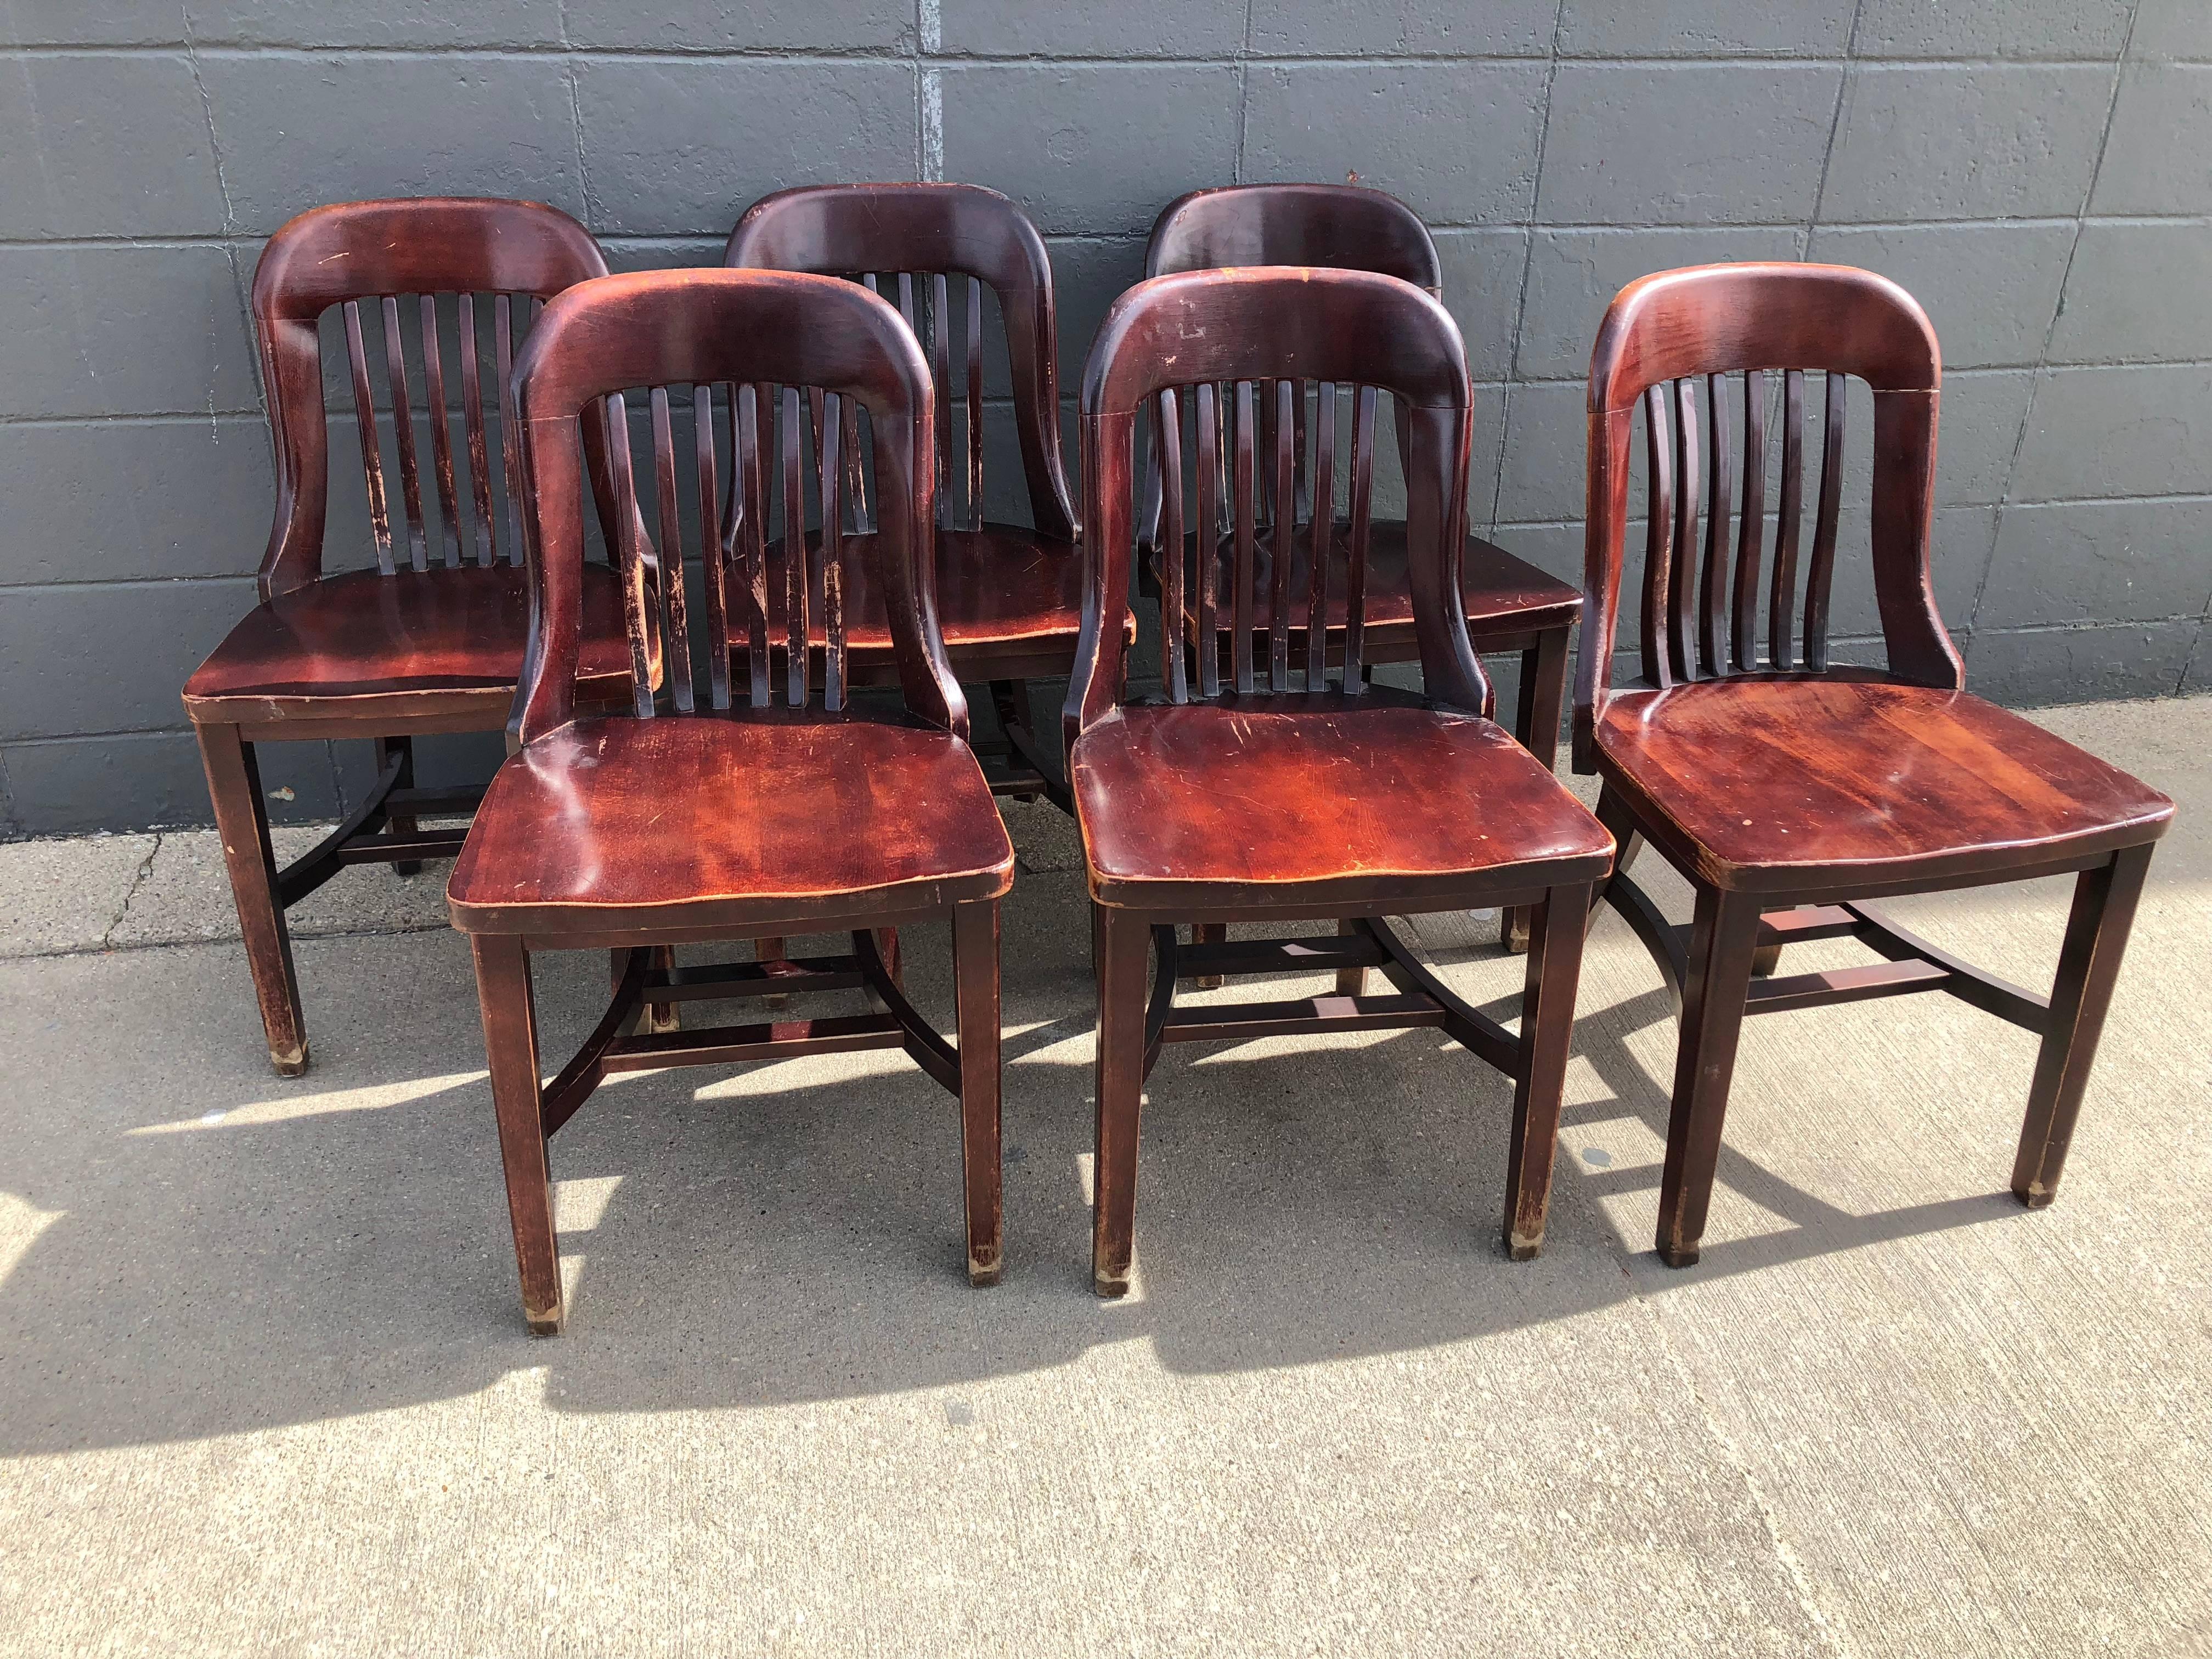 Early 20th century jury chairs from midwestern courtroom. Set of six. Sturdy and significant oak, richly stained and varnished. Classic lines and pedigree. Built for comfort and long sitting spells. What trials of crimes and punishment were they sat